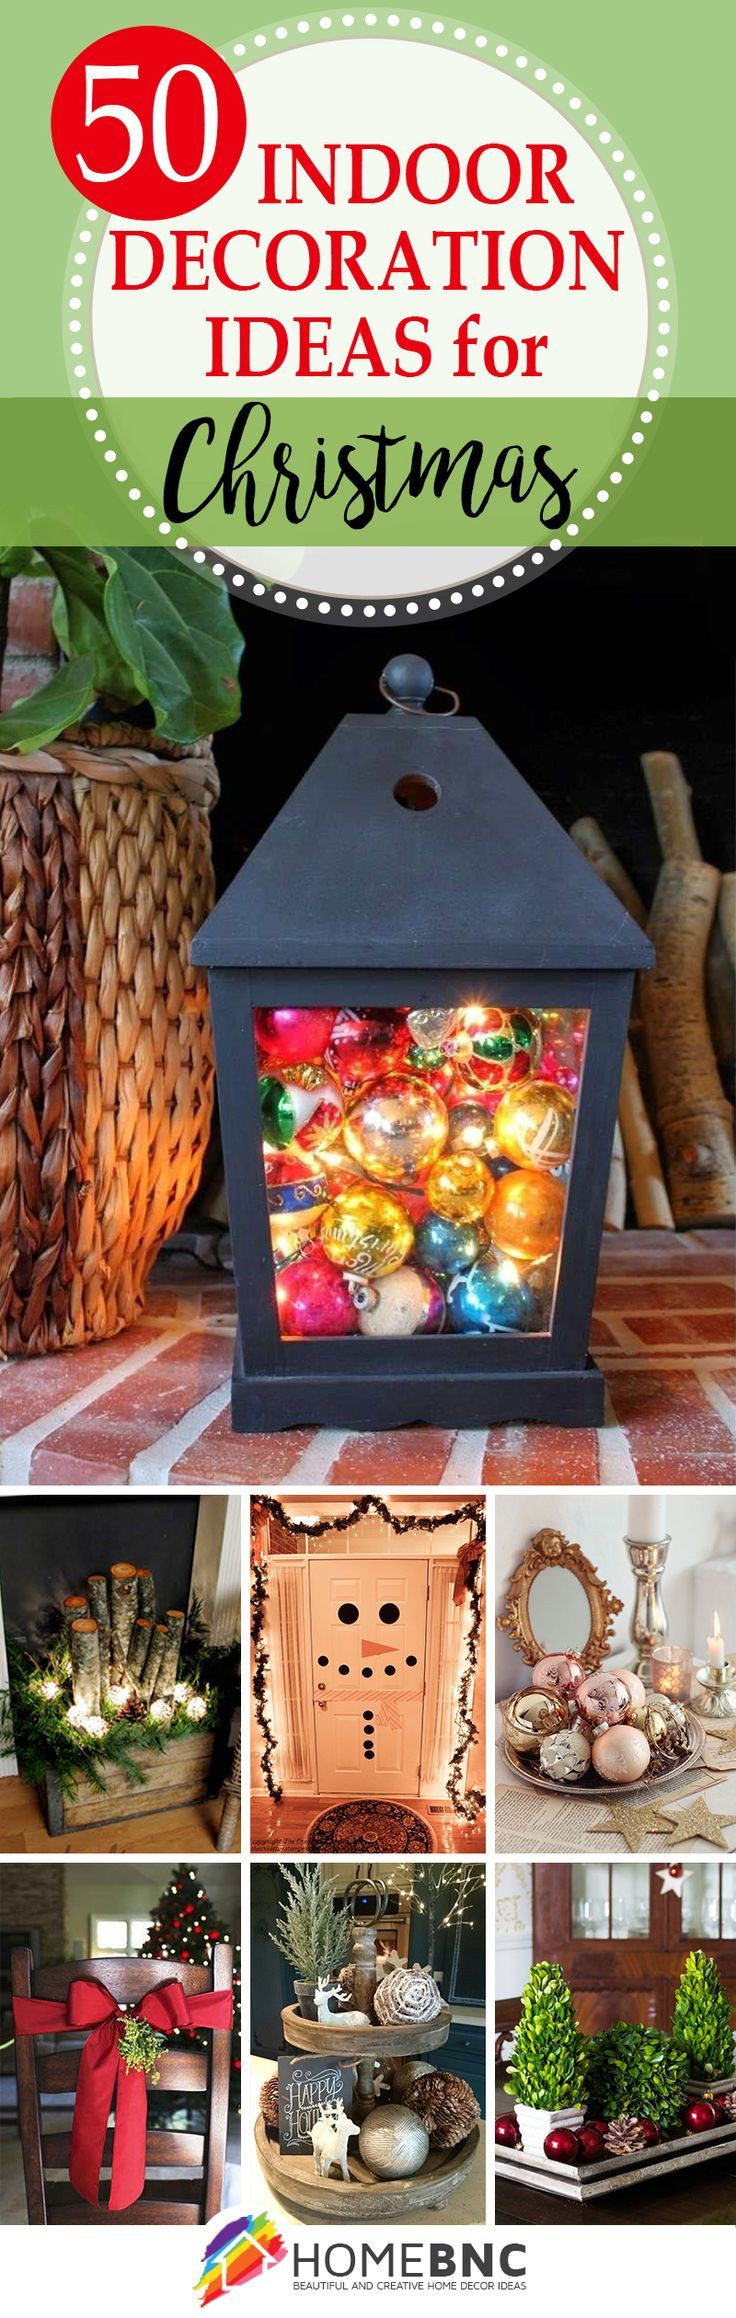 Christmas Lights Indoor Decorating Ideas
 Pin by AutismlandPenny on Holiday Christmas